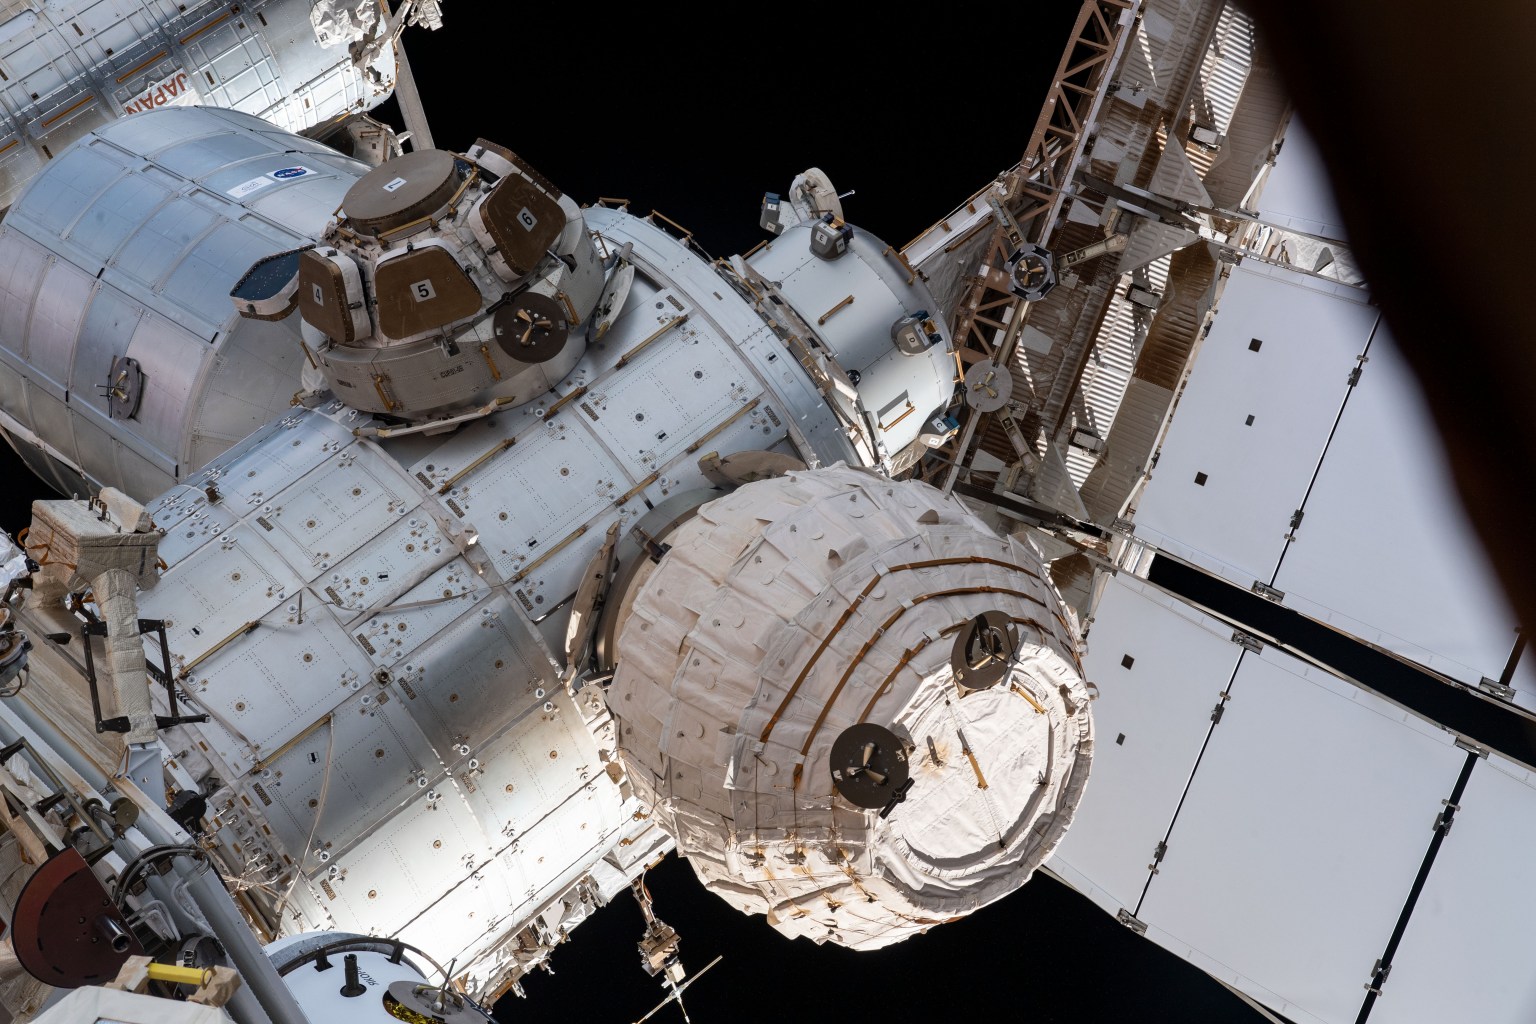 This view from a window on the International Space Station's Russian segment shows the Bigelow Expandable Activity Module (BEAM), the cupola with its seven windows shuttered, and the NanoRacks Bishop airlock. Behind the cupola is the Leonardo permanent multipurpose module. All four components are attached to the Tranquility module.